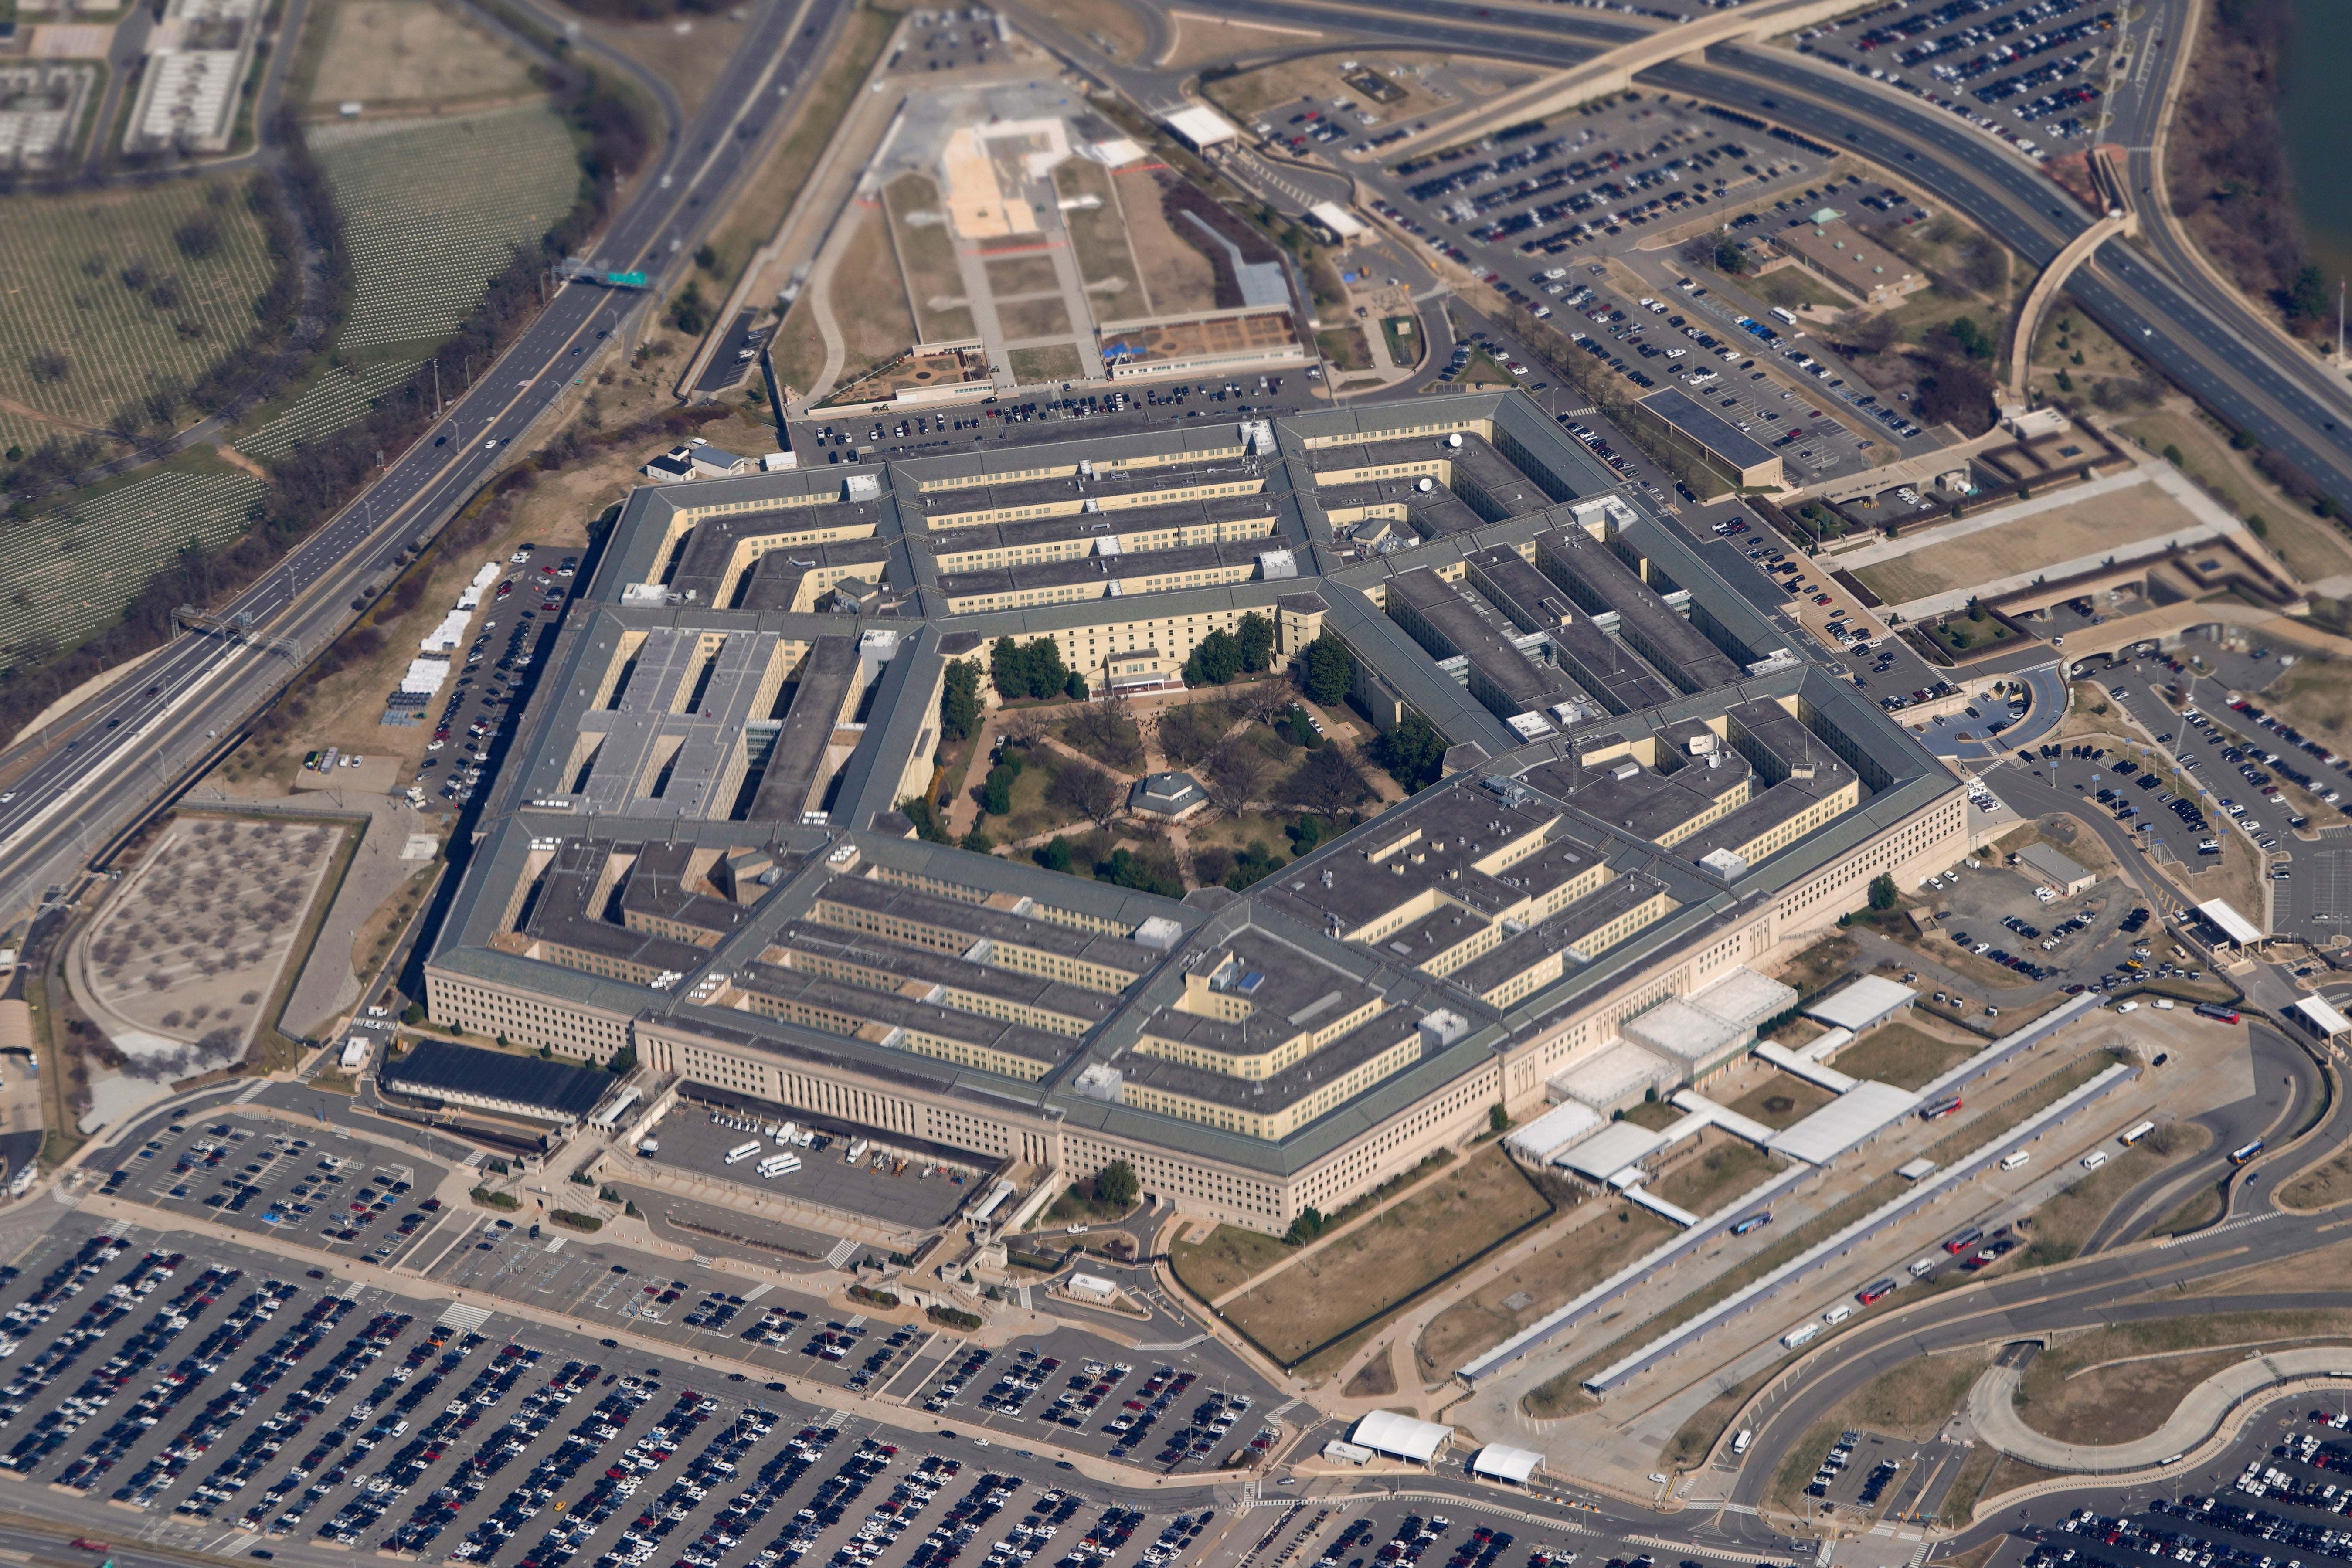 The Pentagon was sent into full-speed damage control to assure allies and assess the scope of the leak